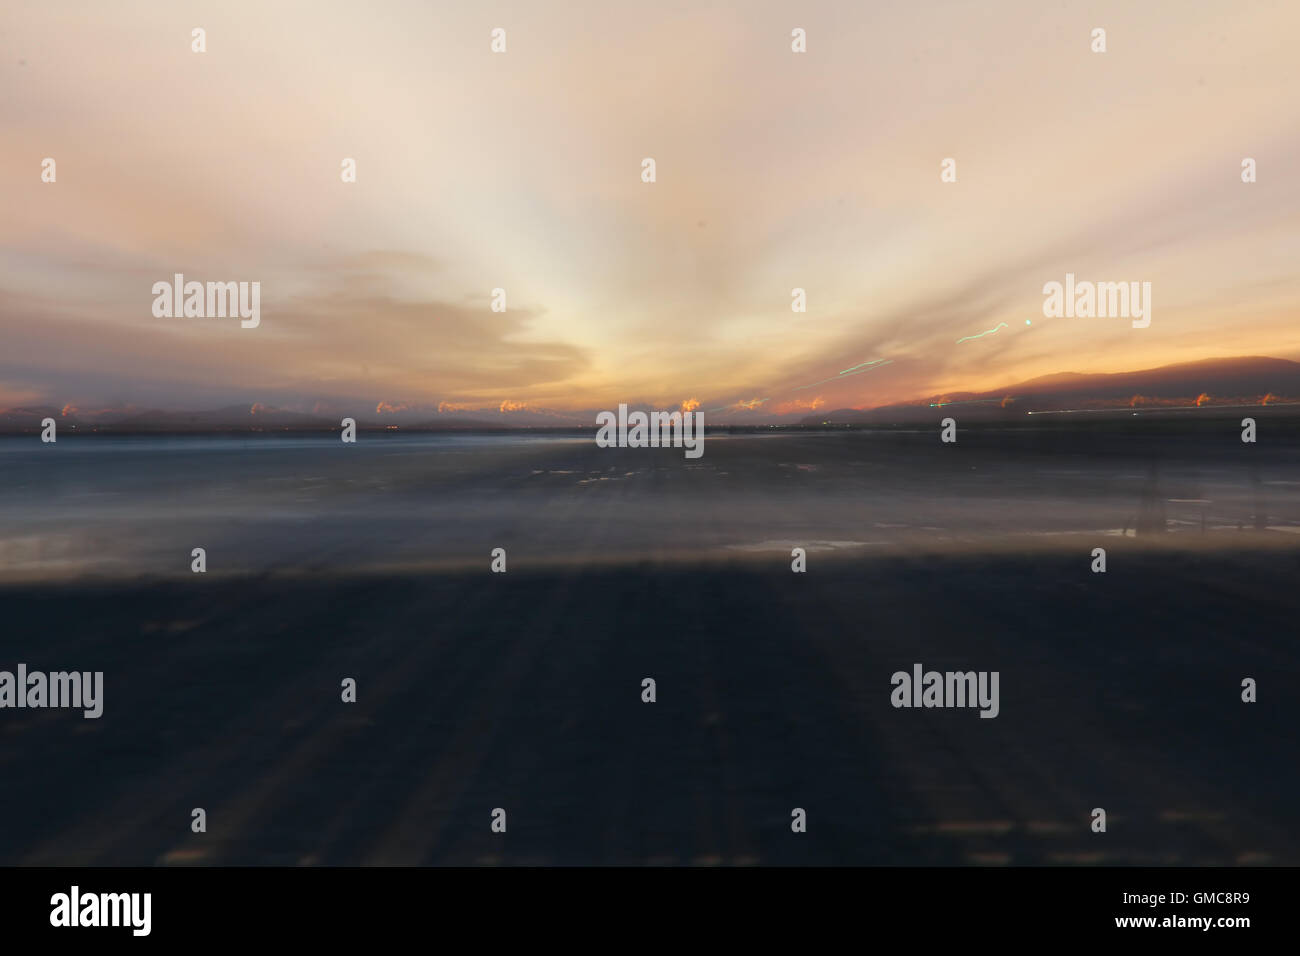 Mostly cloudy, blurry background pattern Stock Photo